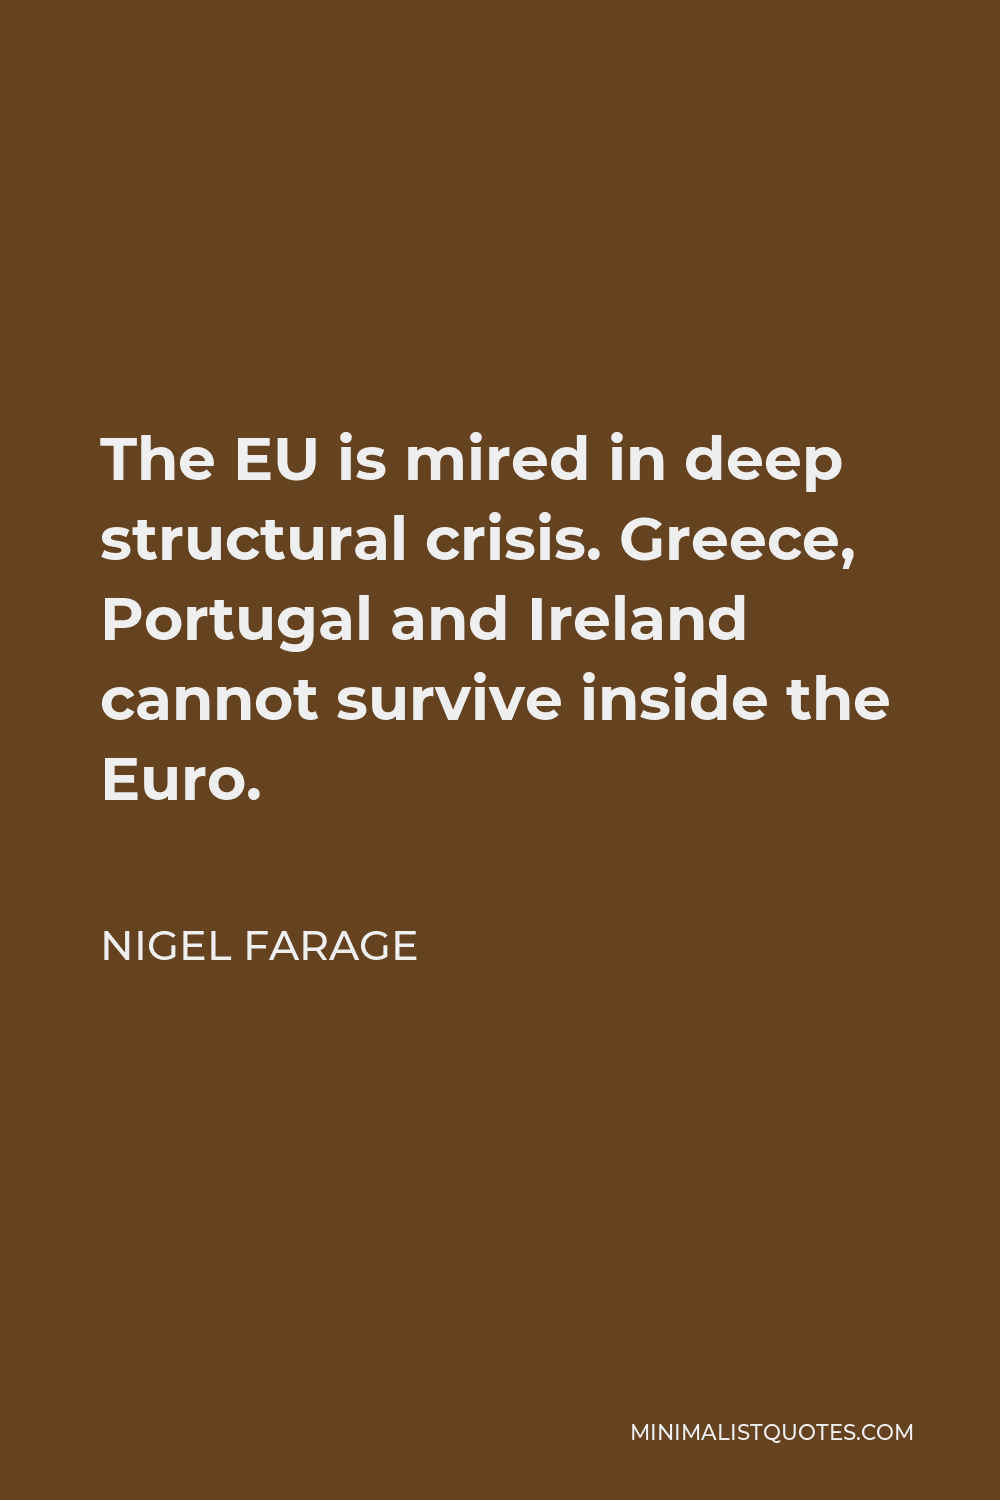 Nigel Farage Quote - The EU is mired in deep structural crisis. Greece, Portugal and Ireland cannot survive inside the Euro.